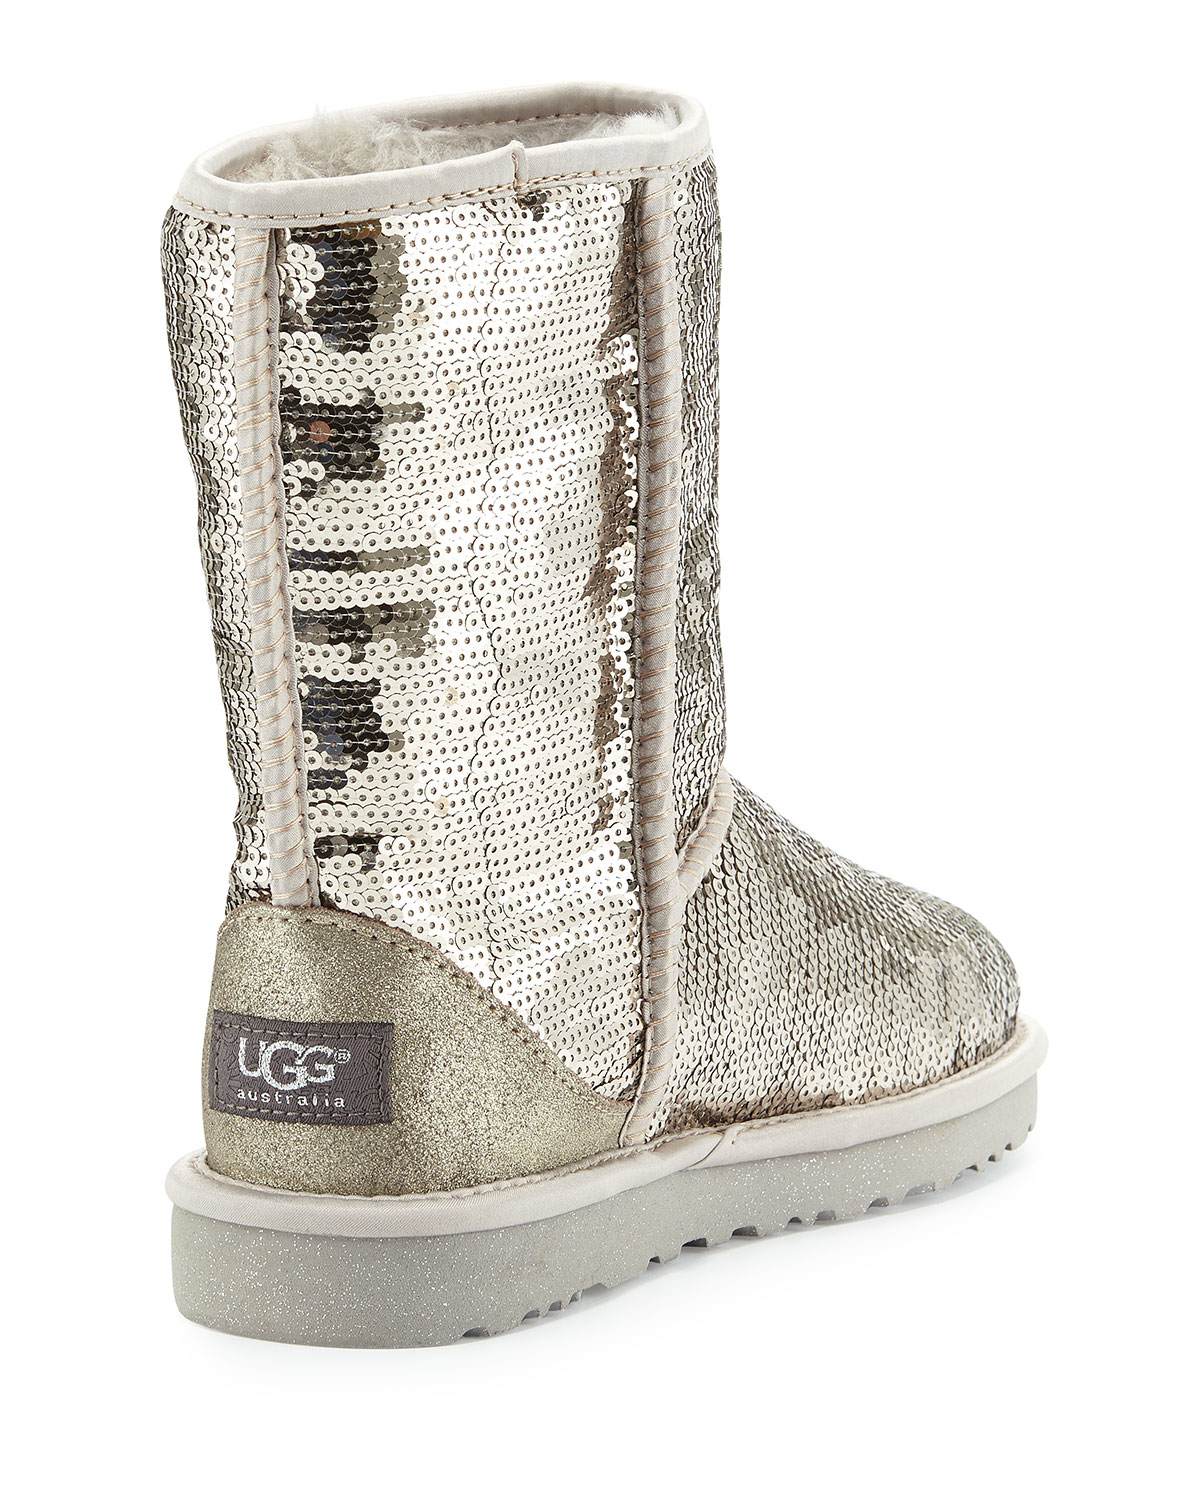 UGG Suede Classic Short Sparkles Boot in Silver (Metallic) - Lyst